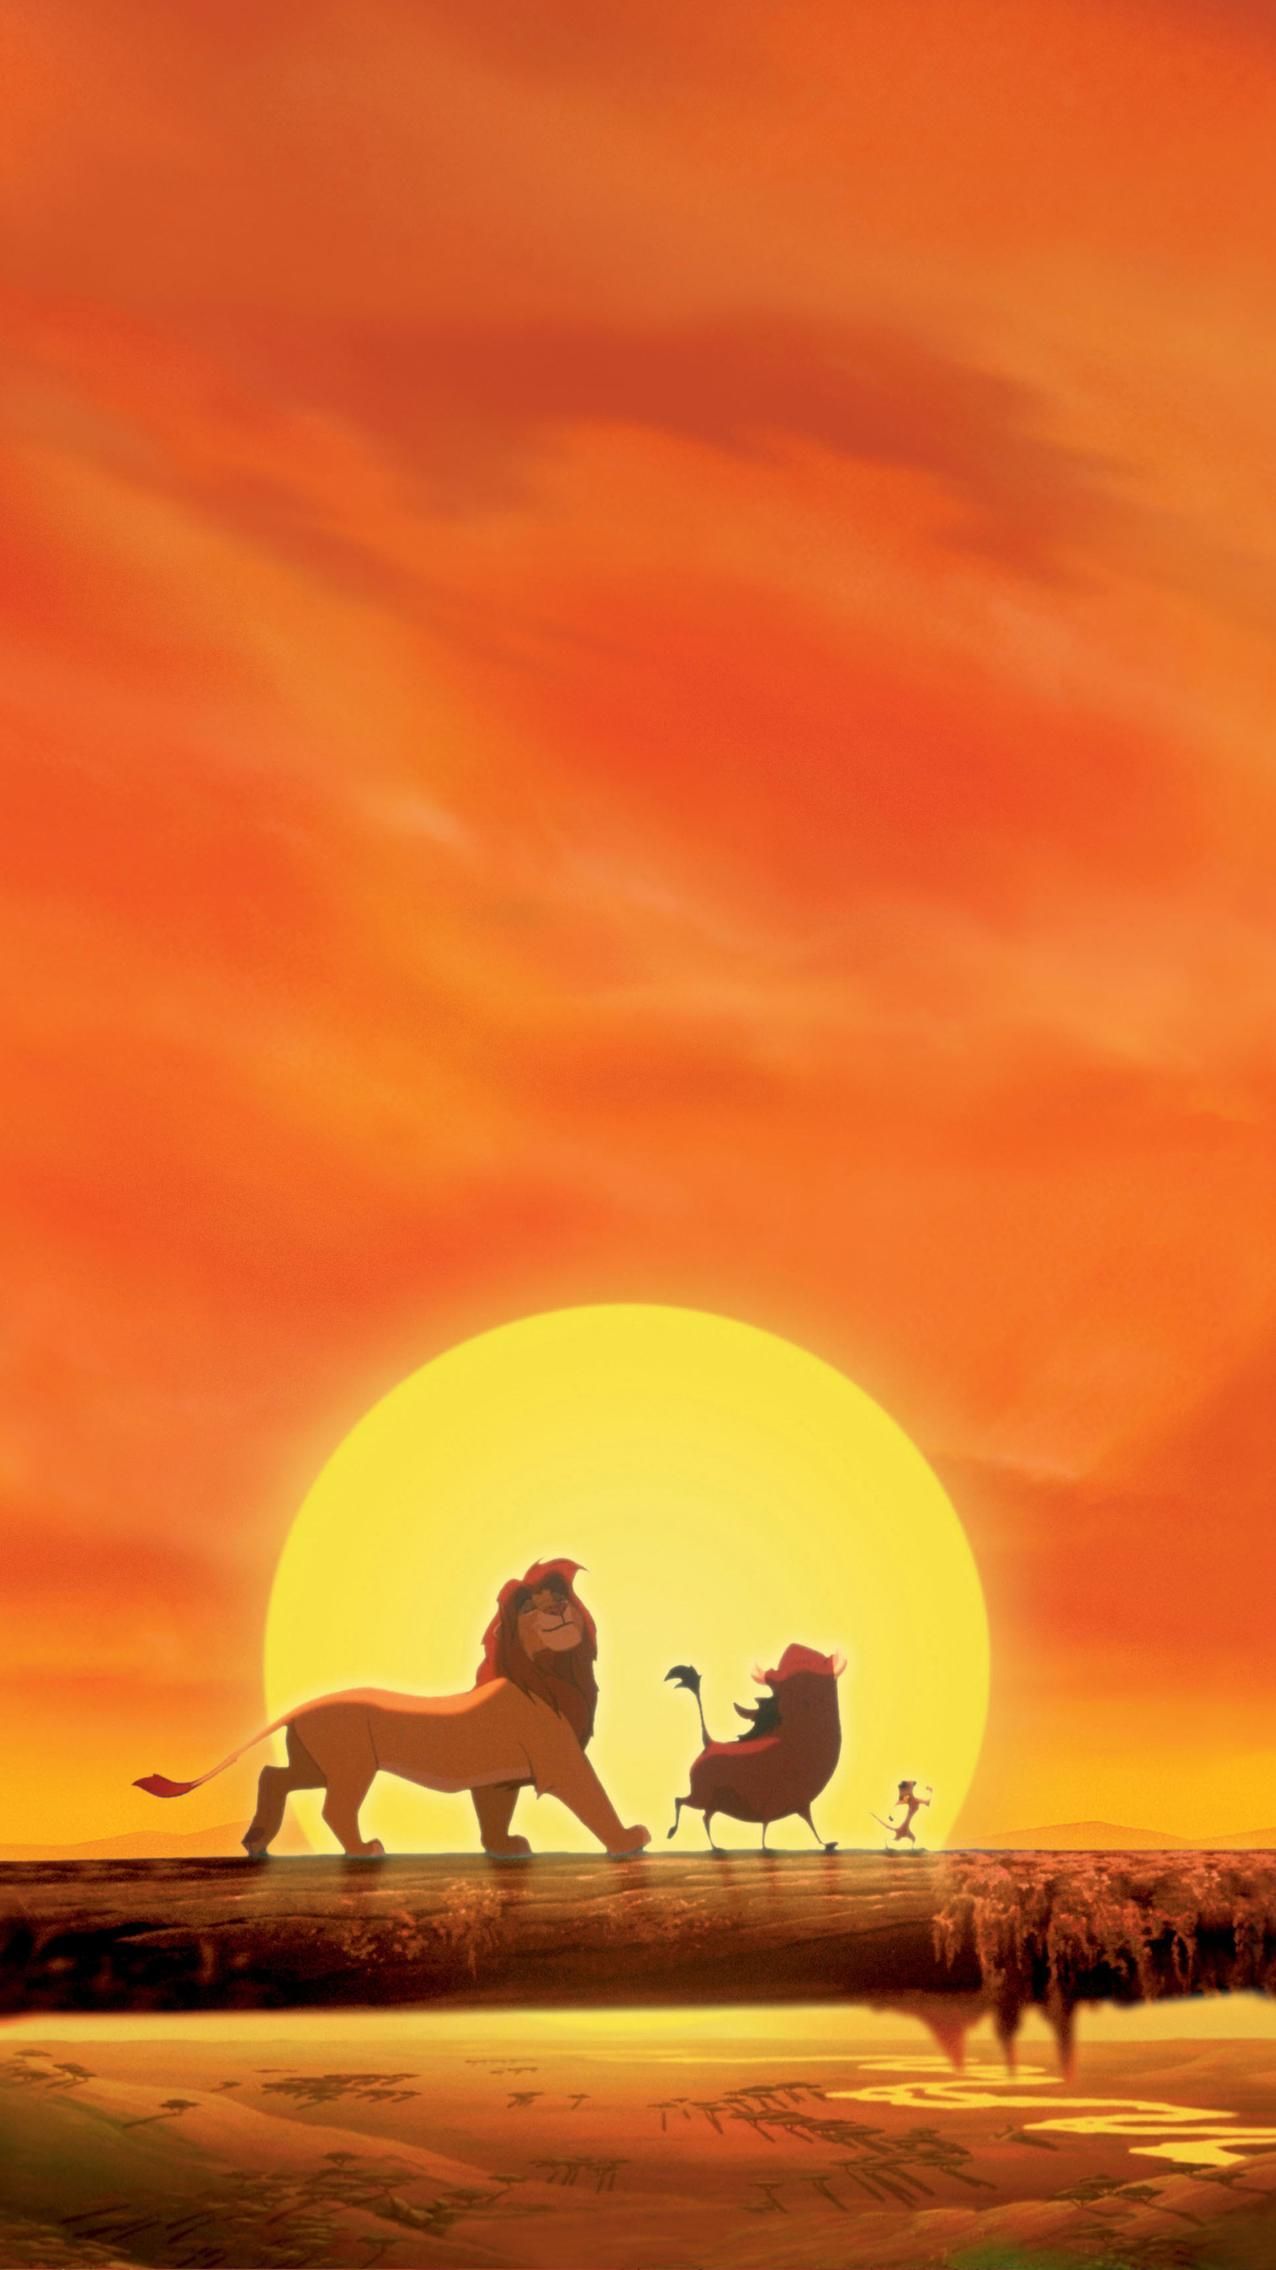 The Lion King 2019 wallpaper 2020 1242x2688 - The Lion King